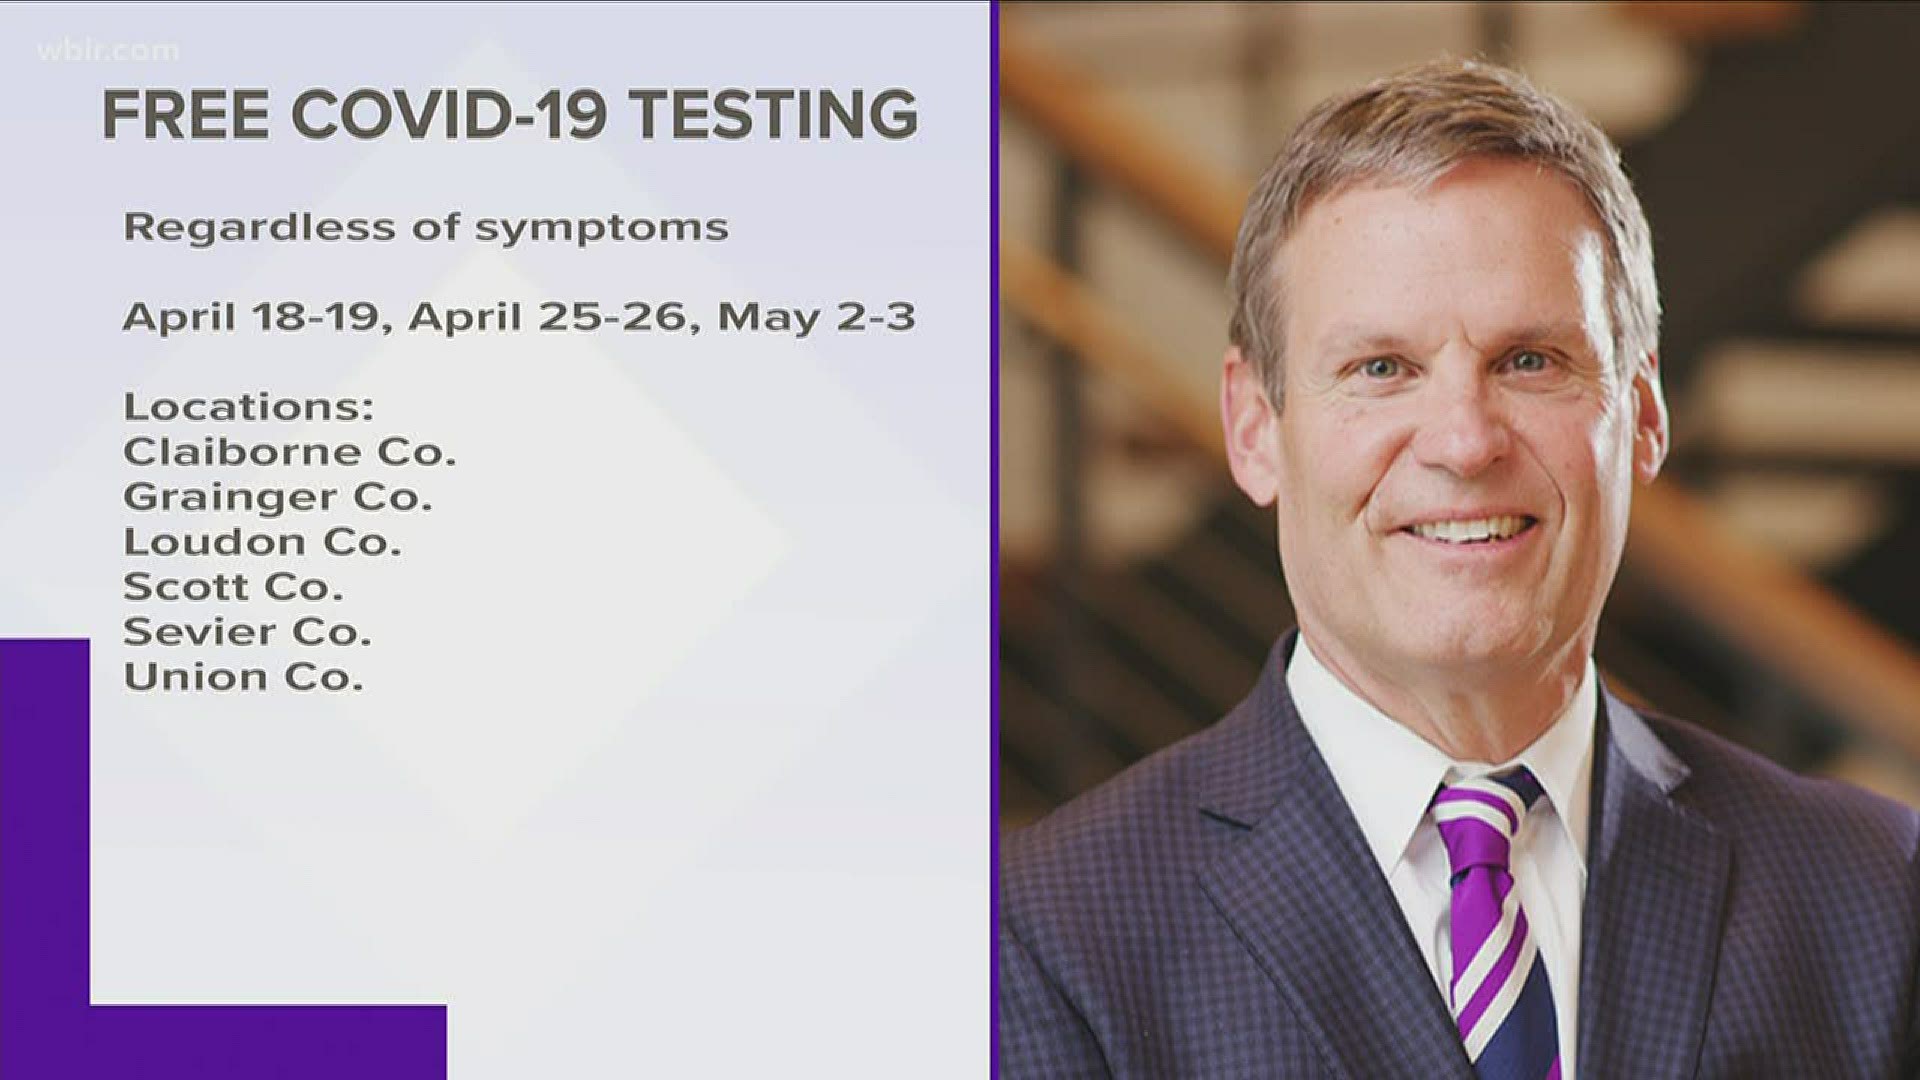 Governor Bill Lee announced free COVID-19 testing for any Tennessean regardless of traditional symptoms.